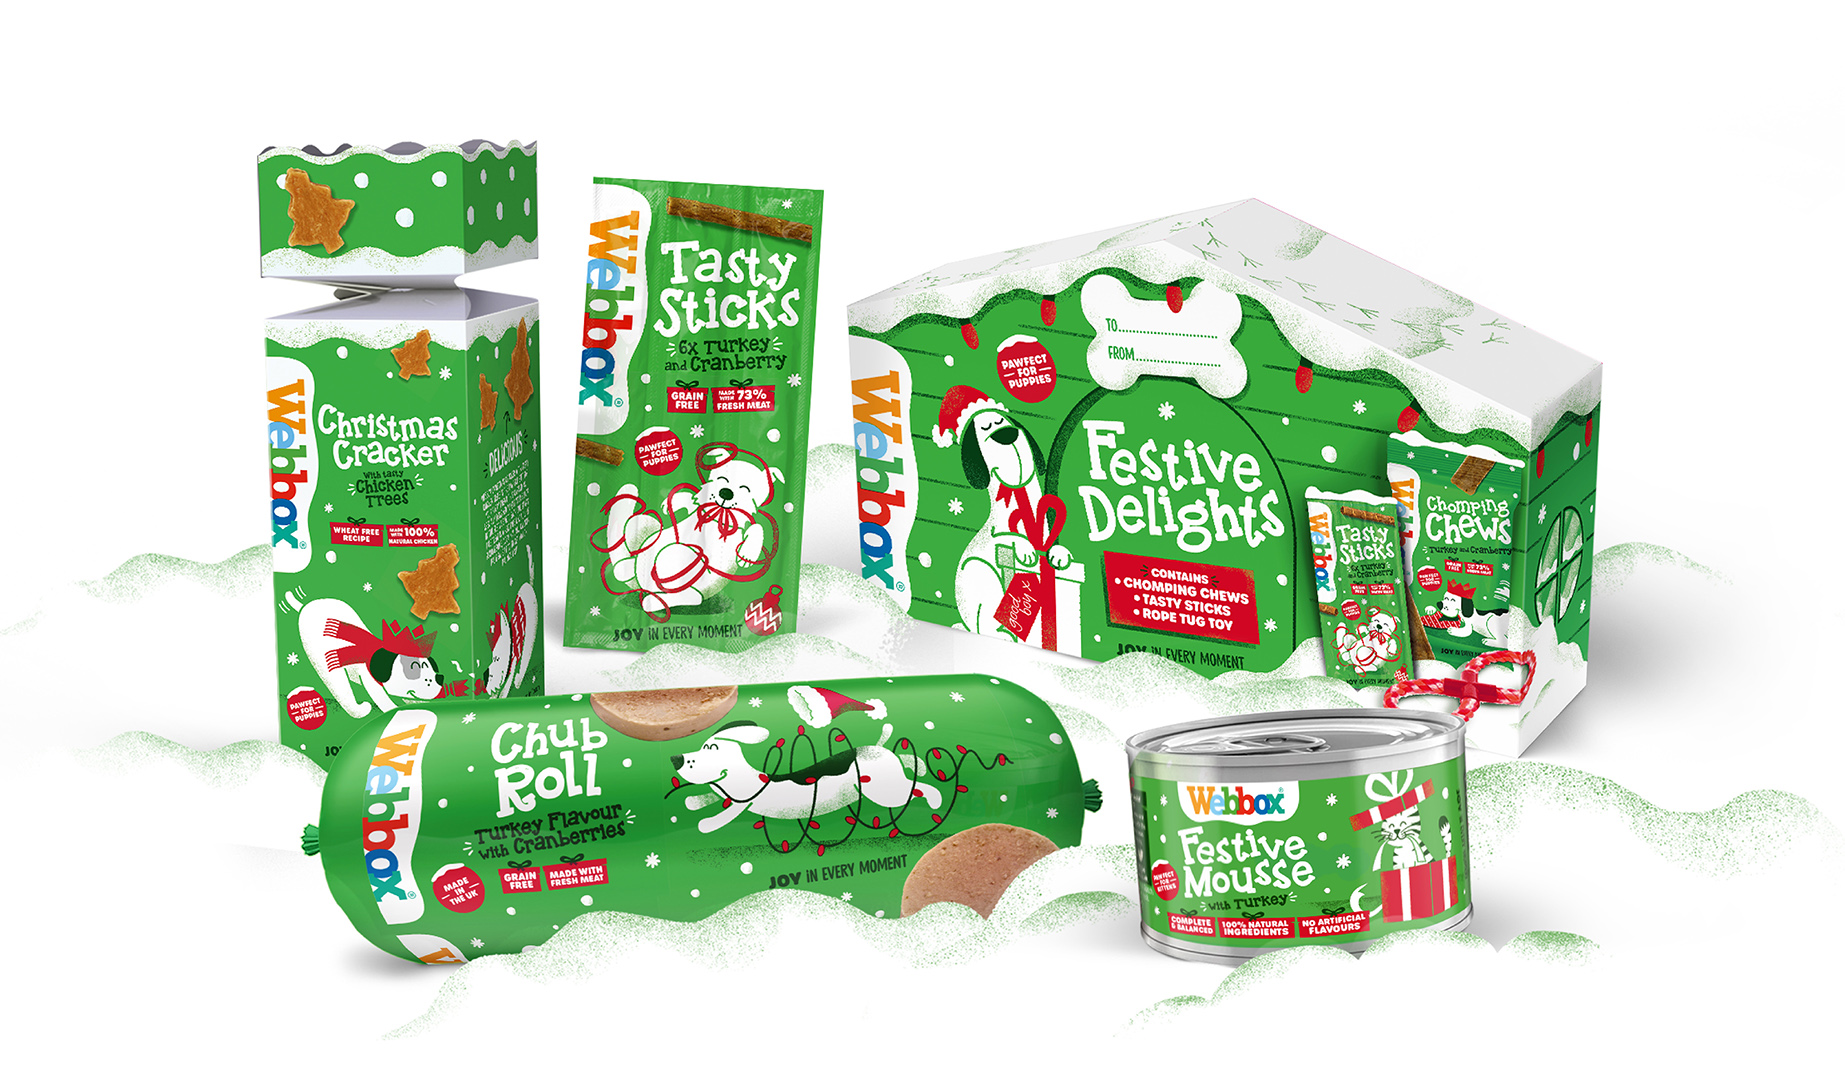 Webbox Christmas Packaging Design by OurCreative